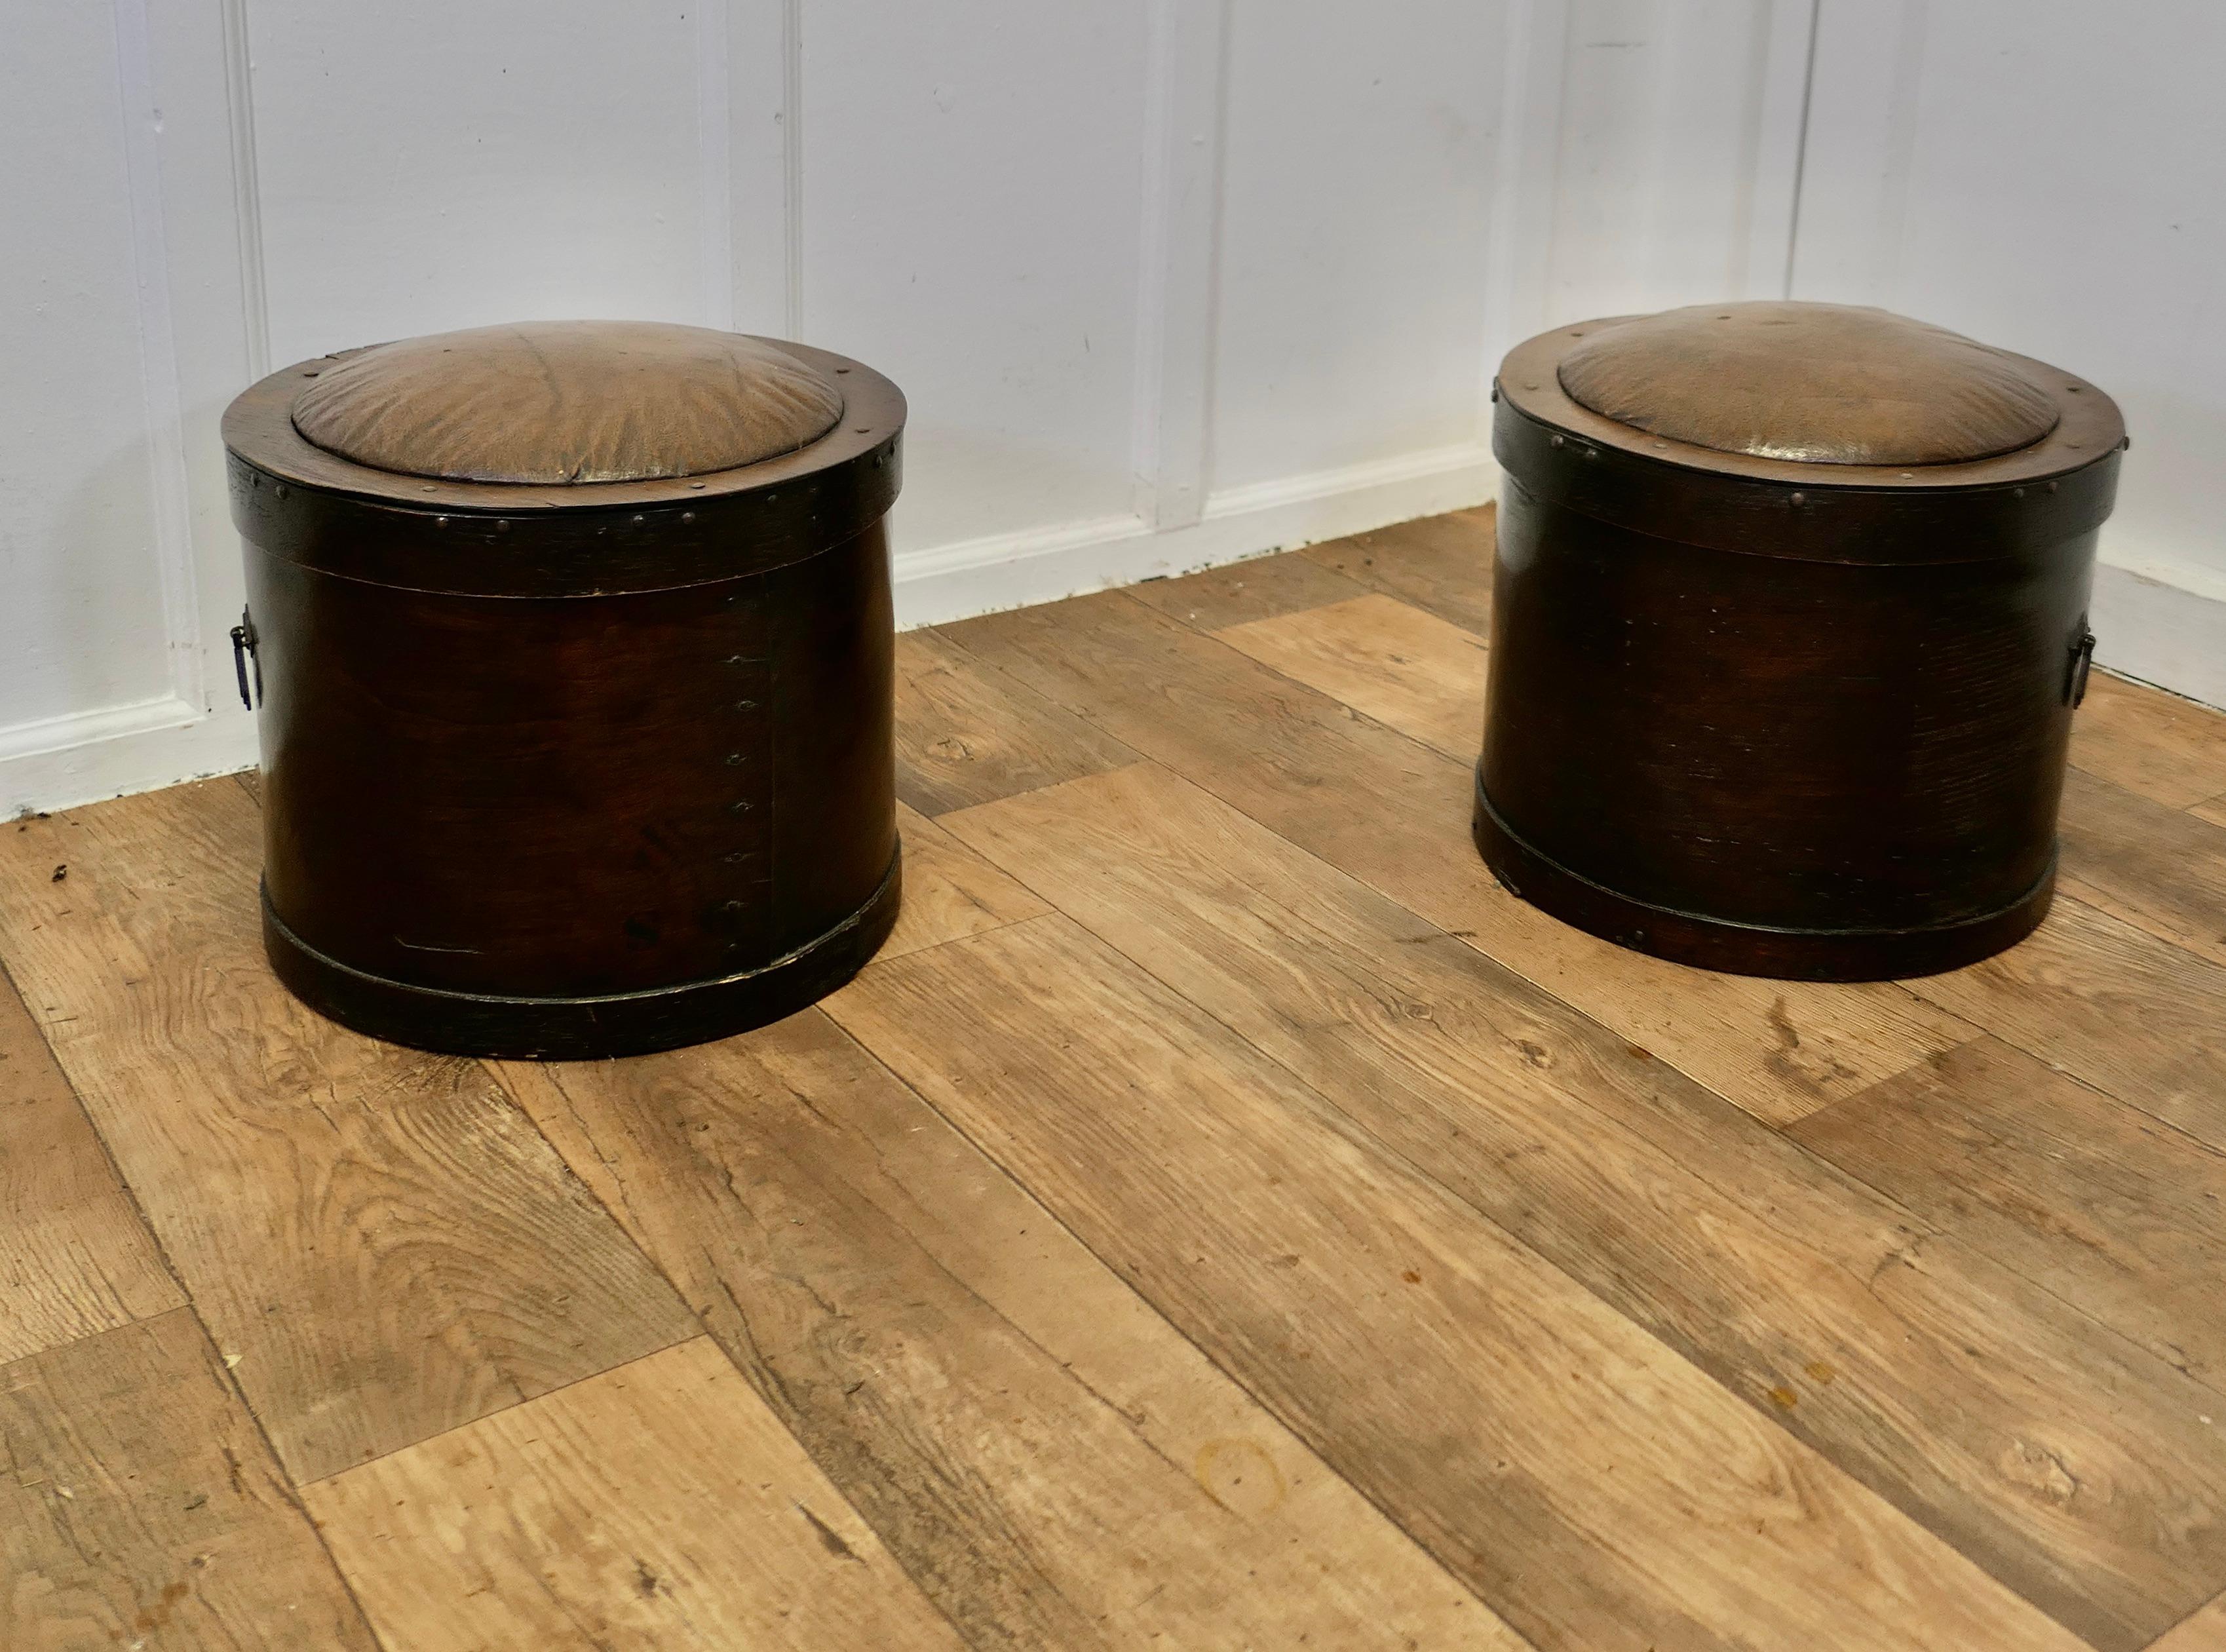 A Pair of 1920s Fireside Stools for Coal and Logs

An attractive pair of circular bentwood Stools, they are covered in Rexine, ( an oil cloth material which looks like Leather )

The seats have Padded removable lids making them ideal storage for